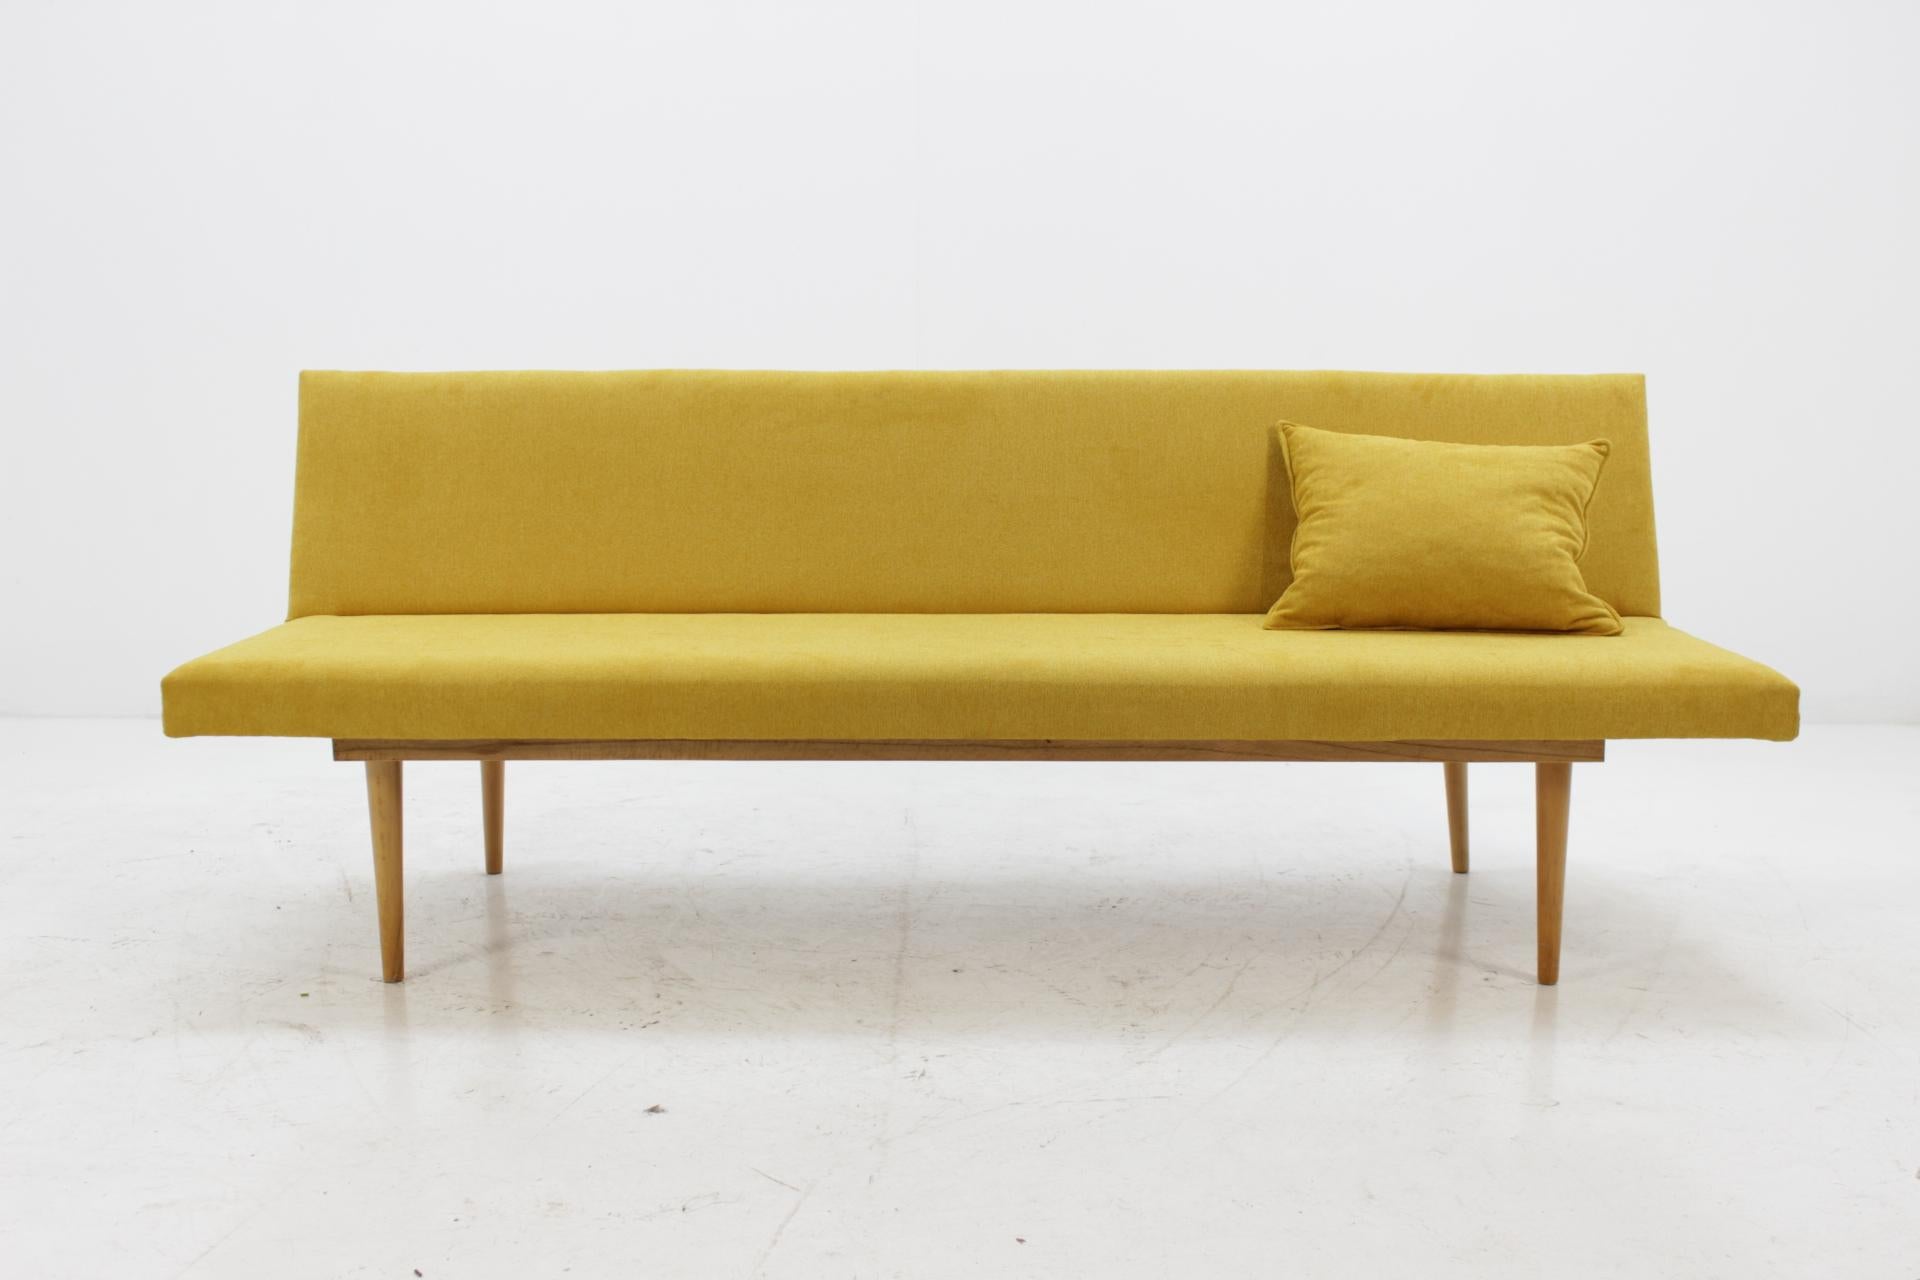 The item made of oakwood and has new upholstery. Dimensions folded sofa is 185 cm x 82 cm.